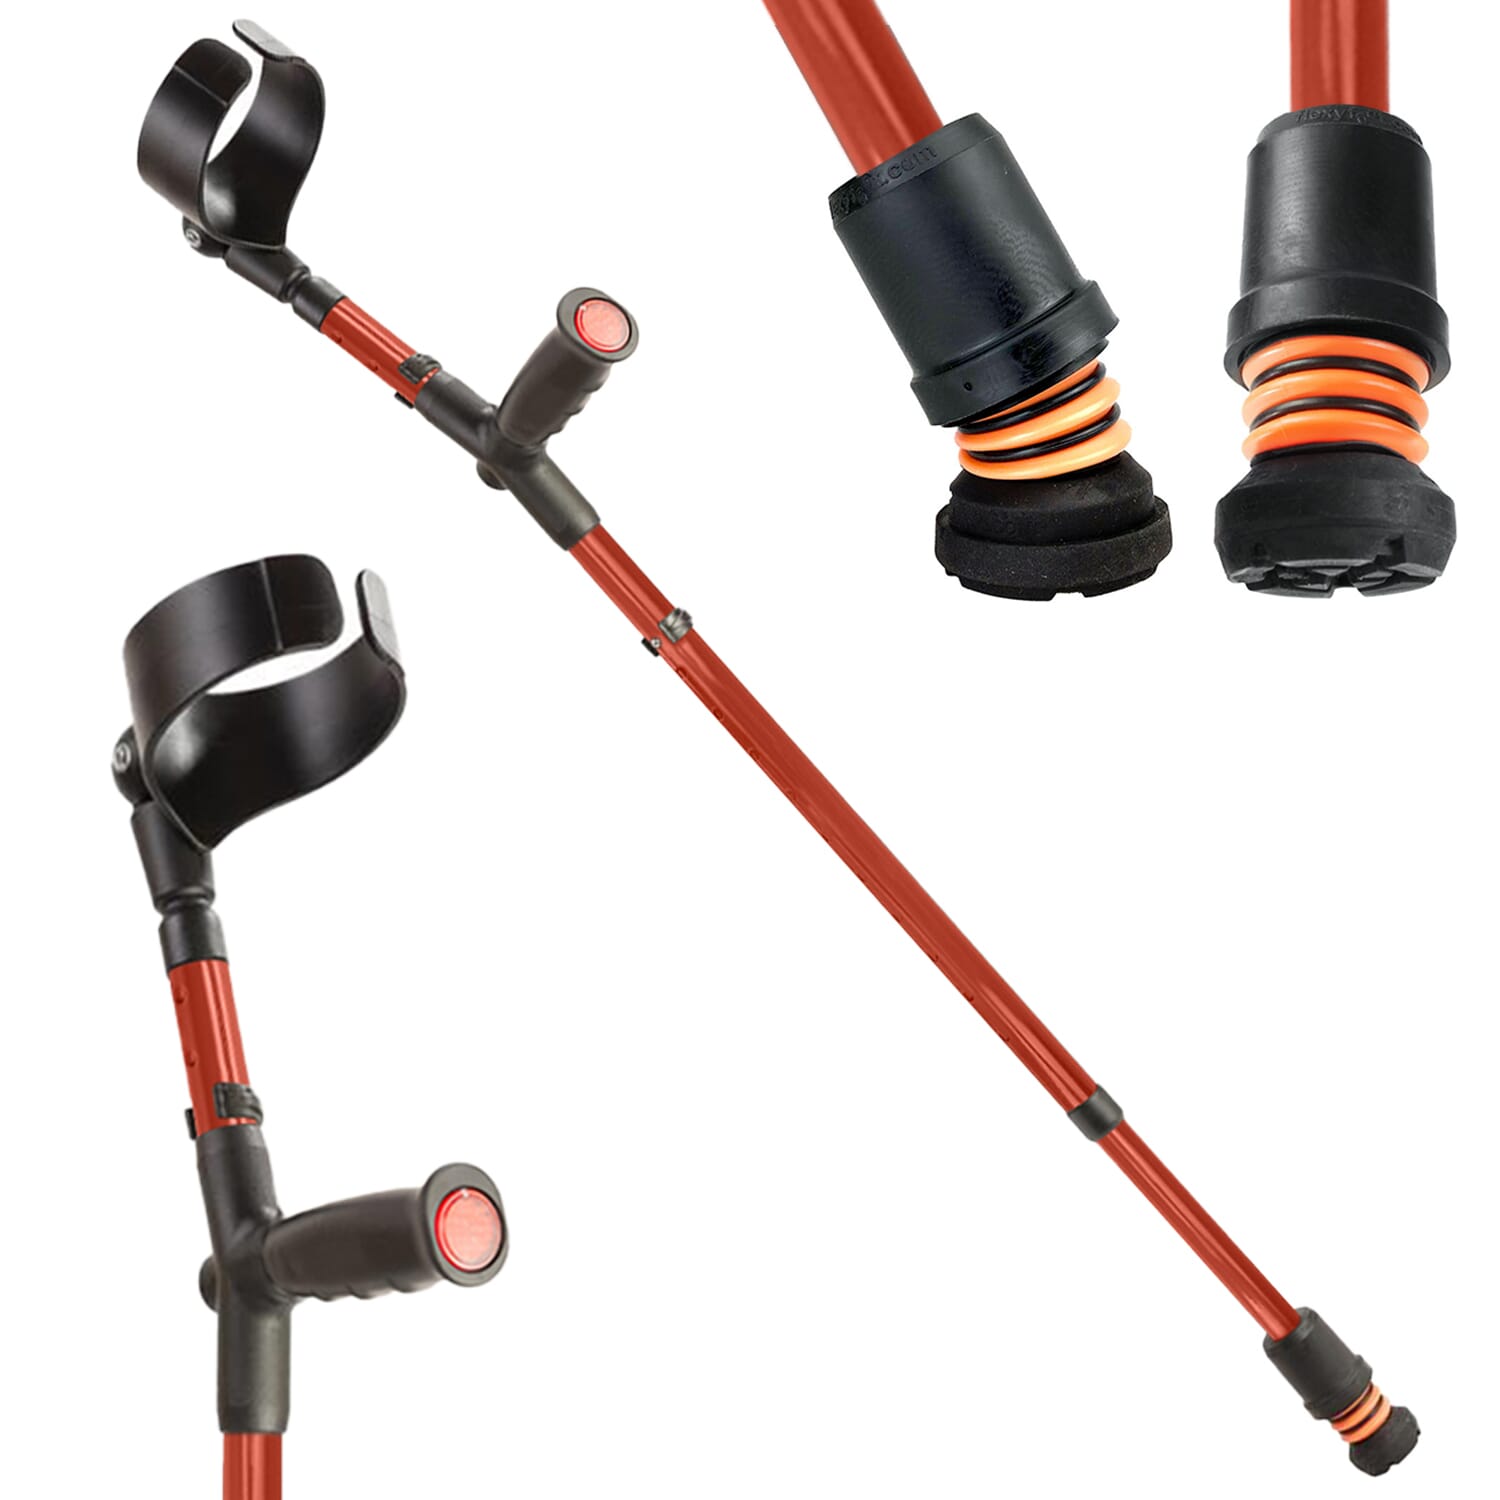 View Flexyfoot Soft Grip Double Adjustable Crutches Red Single information